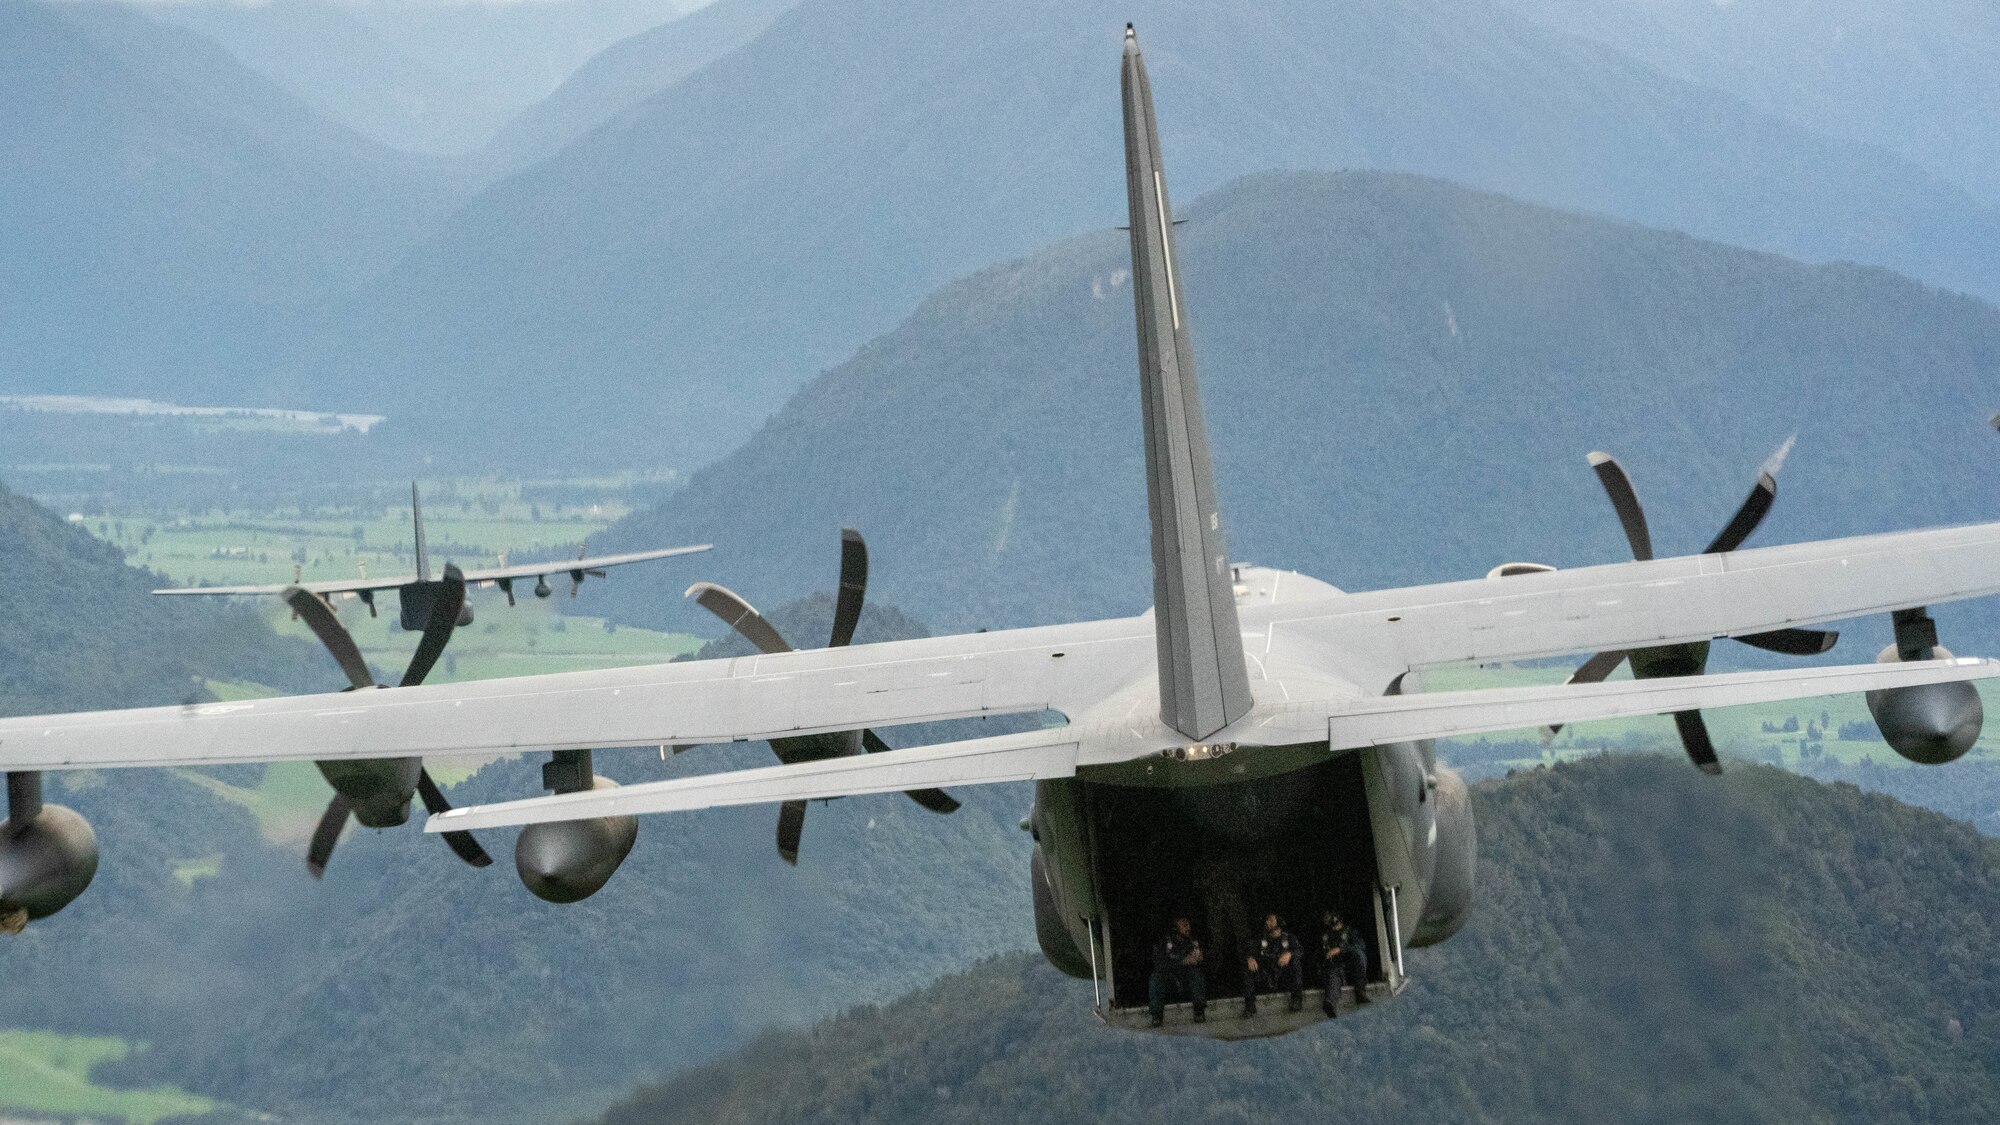 Members of the Royal New Zealand Air Force’s 40 Squadron observe their surroundings from the open ramp of a U.S. Air Force MC-130J Commando II